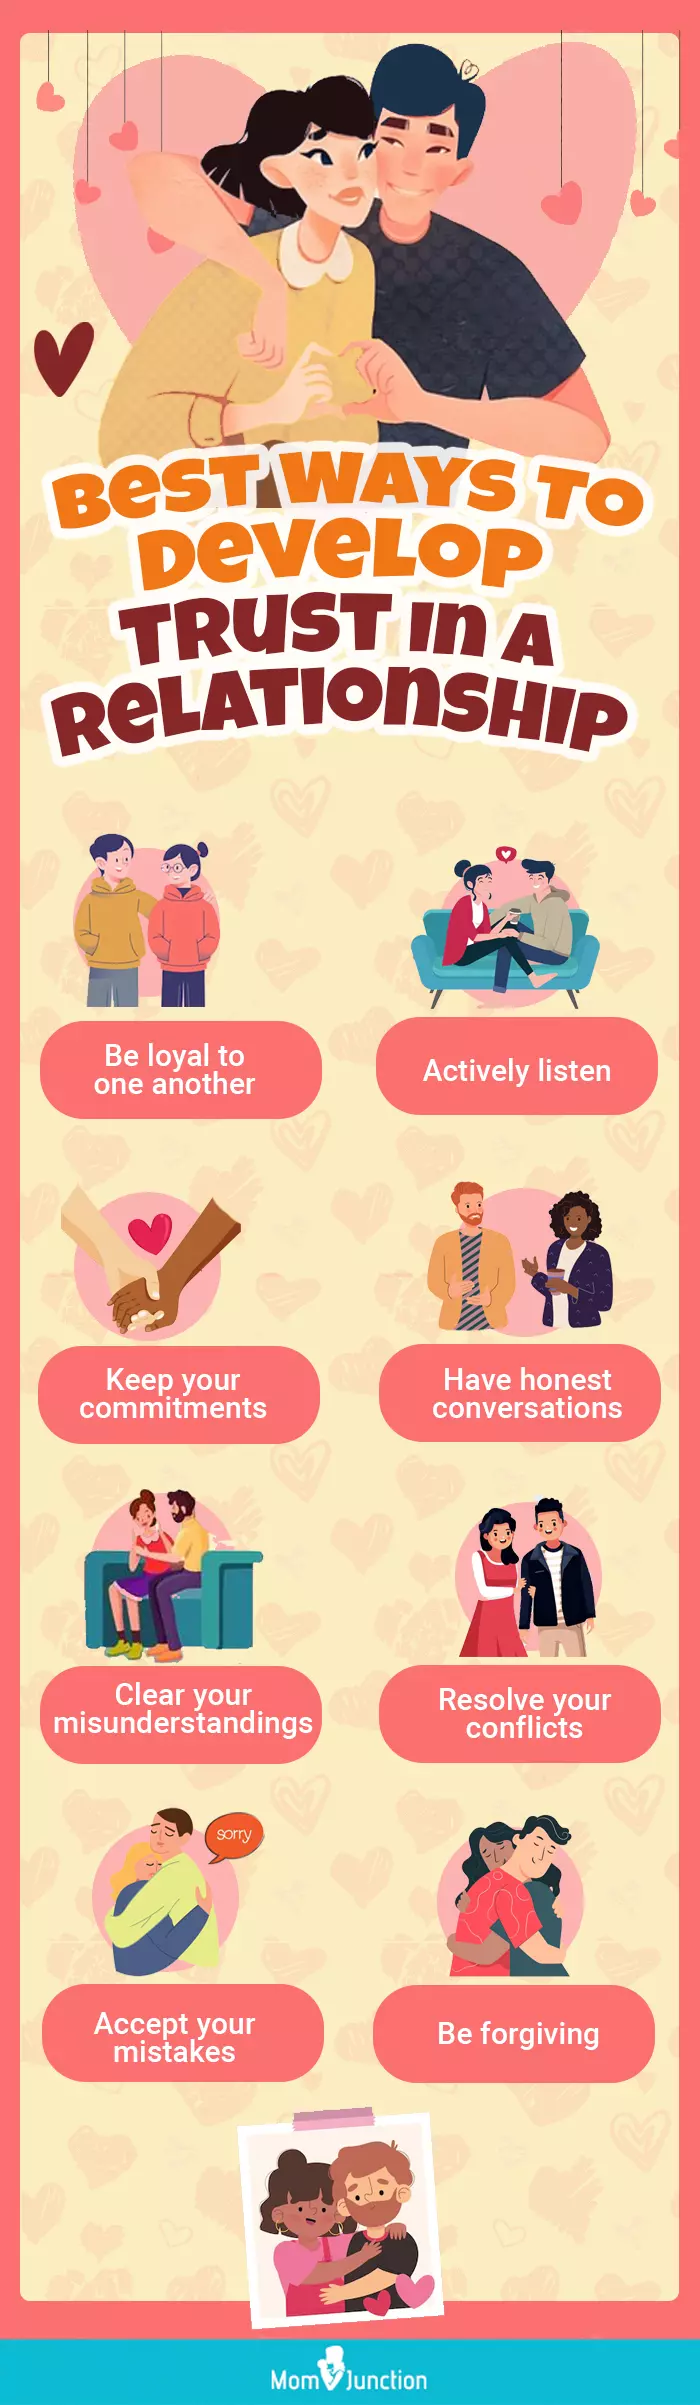 ways to develop trust in a relationship (infographic)